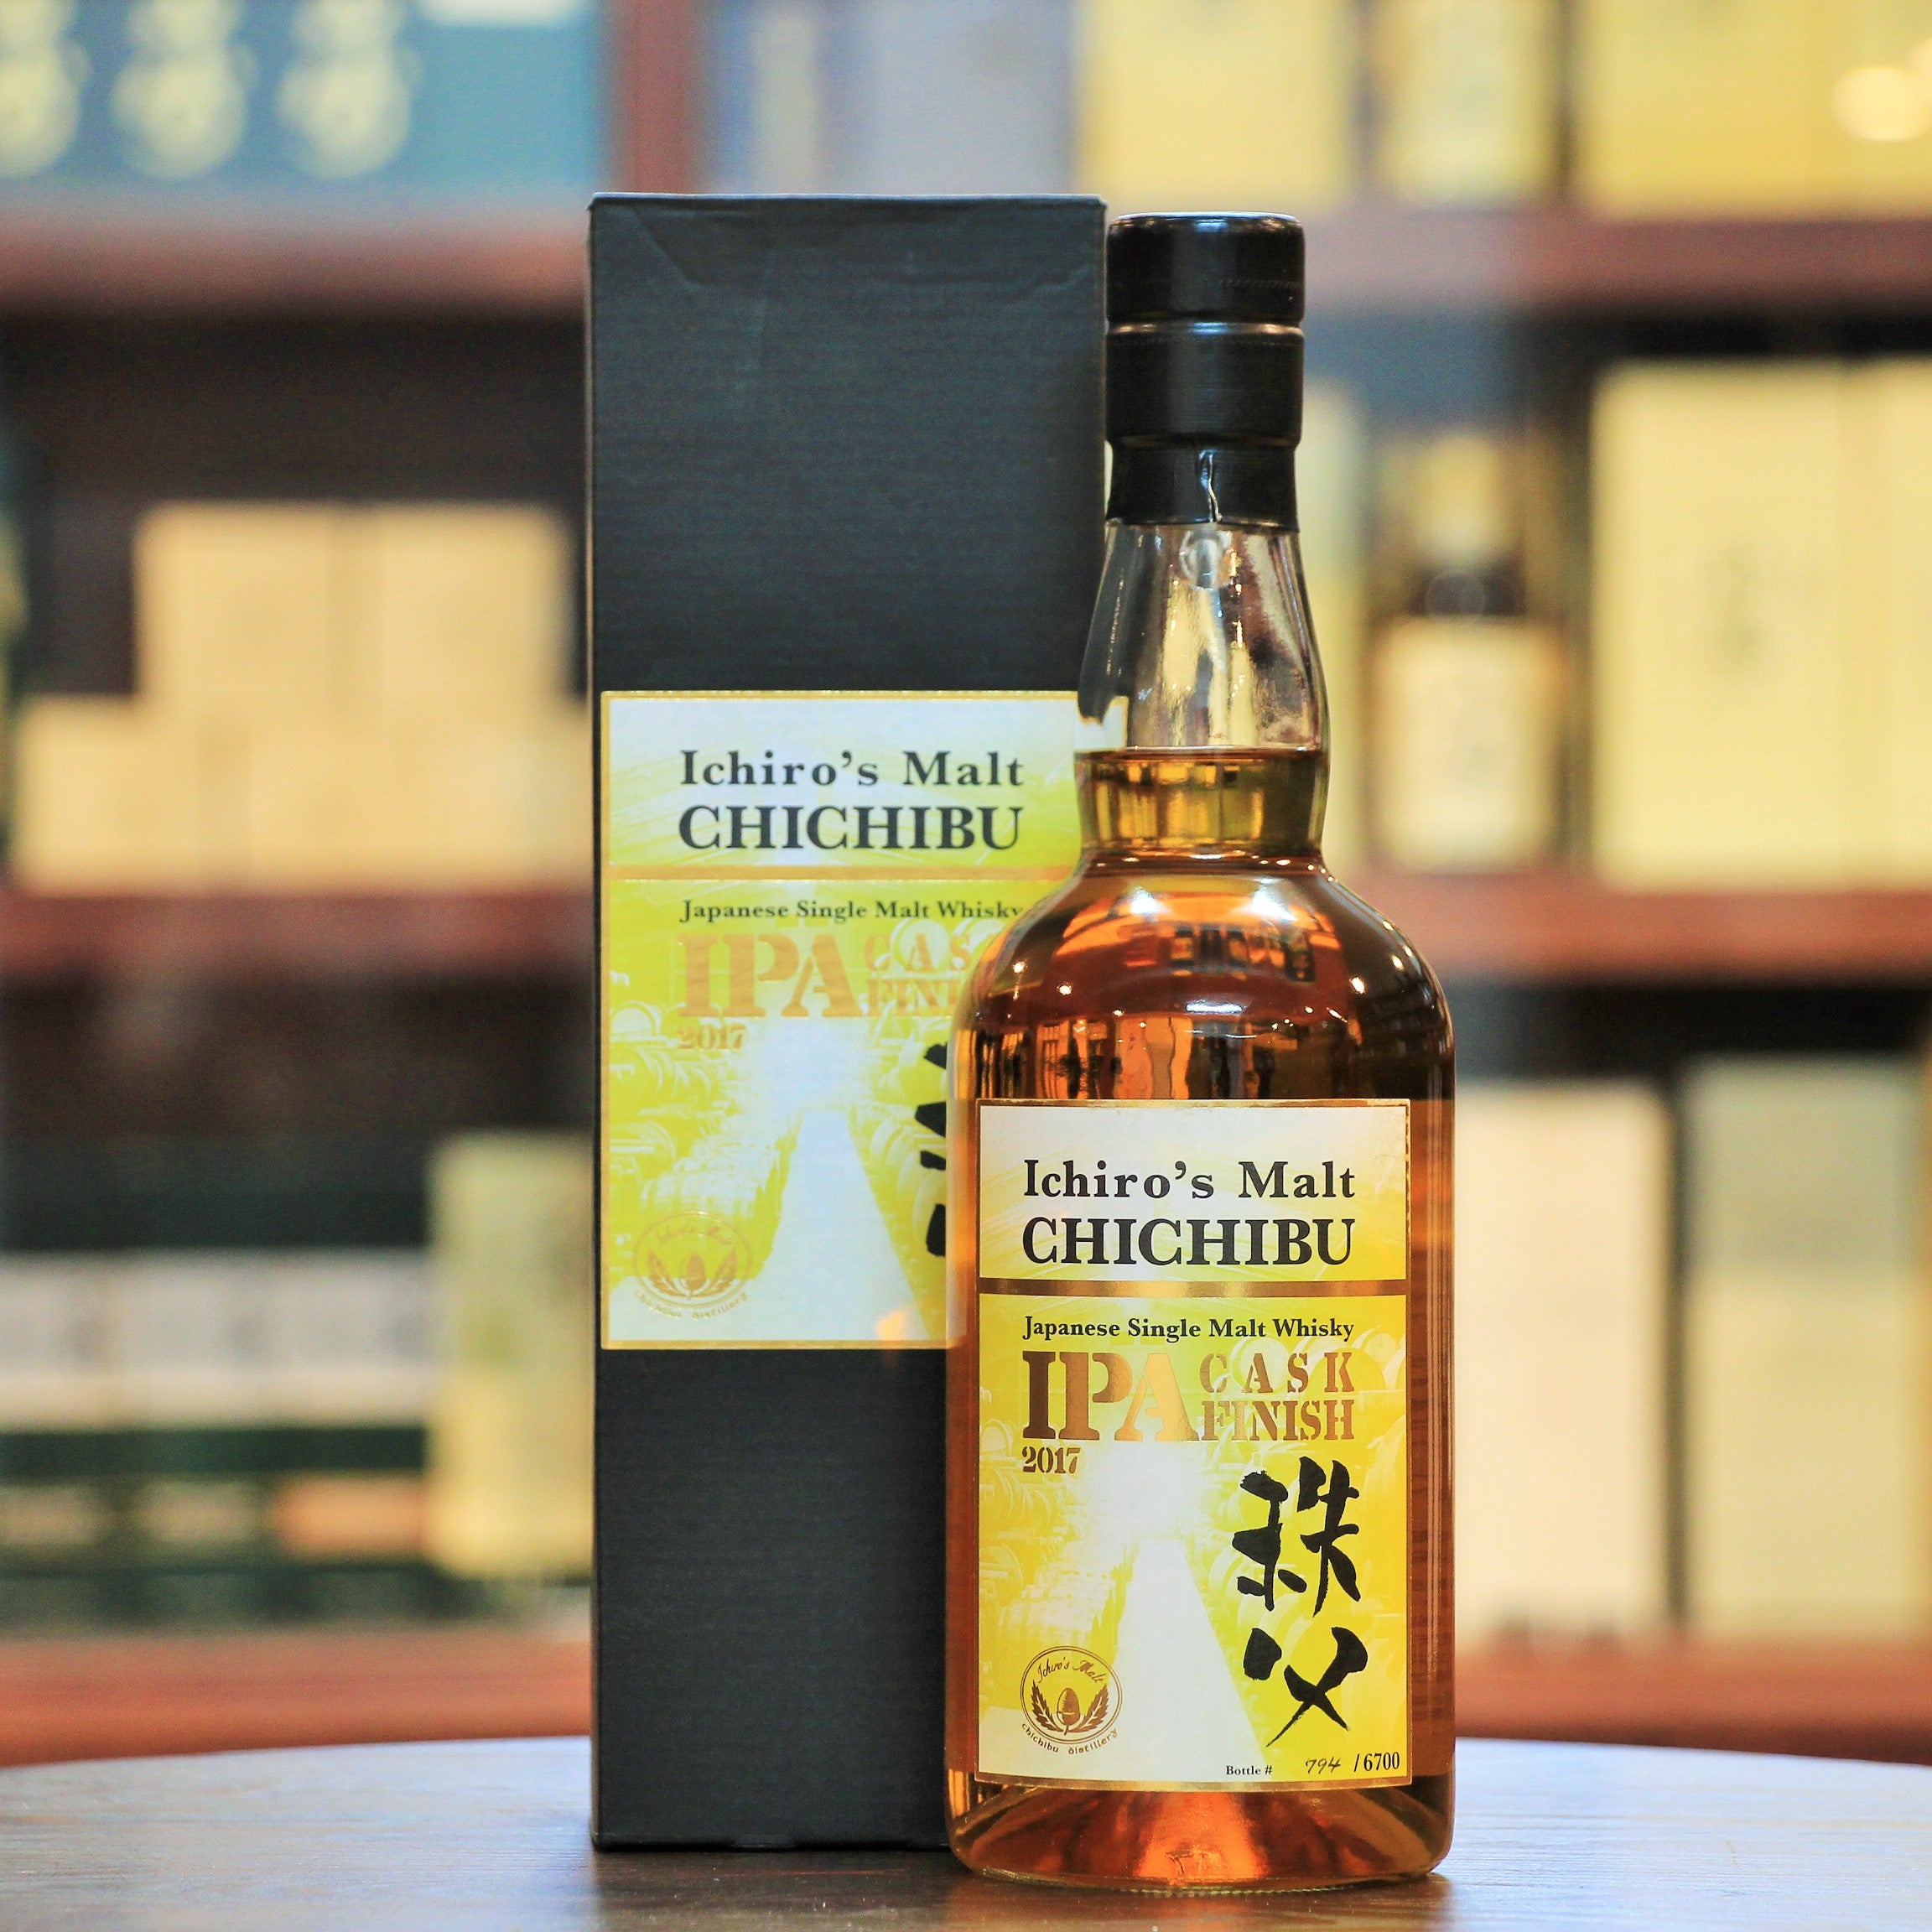 Ichiro's Malt 2010 Chichibu Single Cask #2651 Whisky, Limited to 6700 bottles in collaboration w/Japanese craft brewer. Finished in "beer washed’ barrels. Hoppy flavours w/honey and lemon.